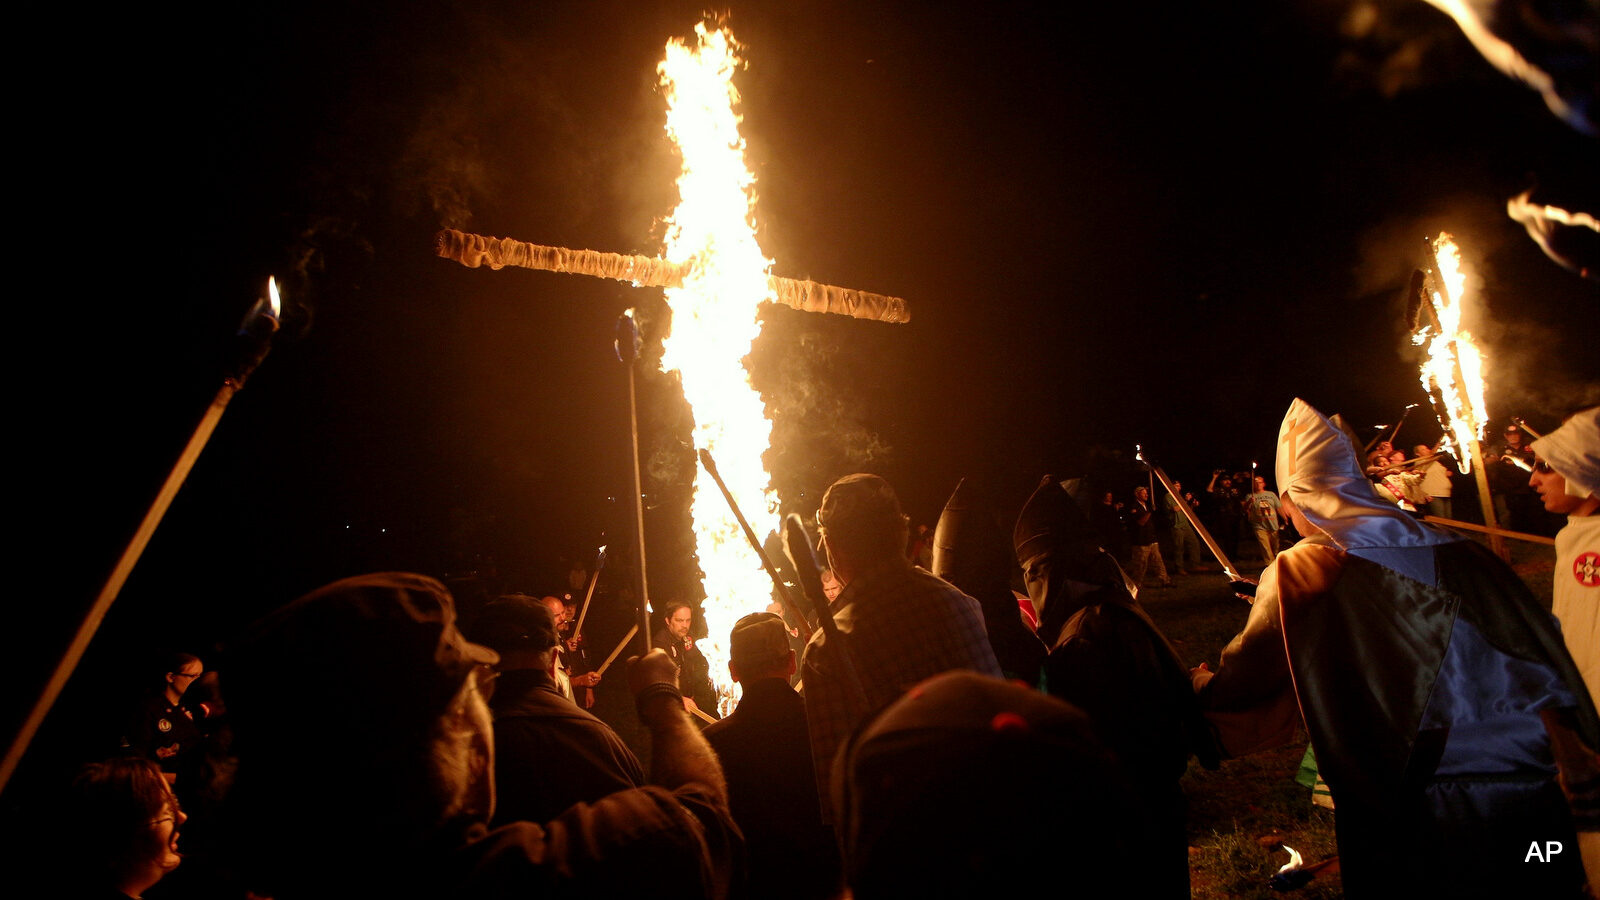 Members of the Ku Klux Klan participate in cross burnings after a "White Pride," rally, in rural Paulding County near Cedar Town, Ga. The Ku Klux Klan is trying to raise its hooded head 150 years after it was founded following the Civil War.